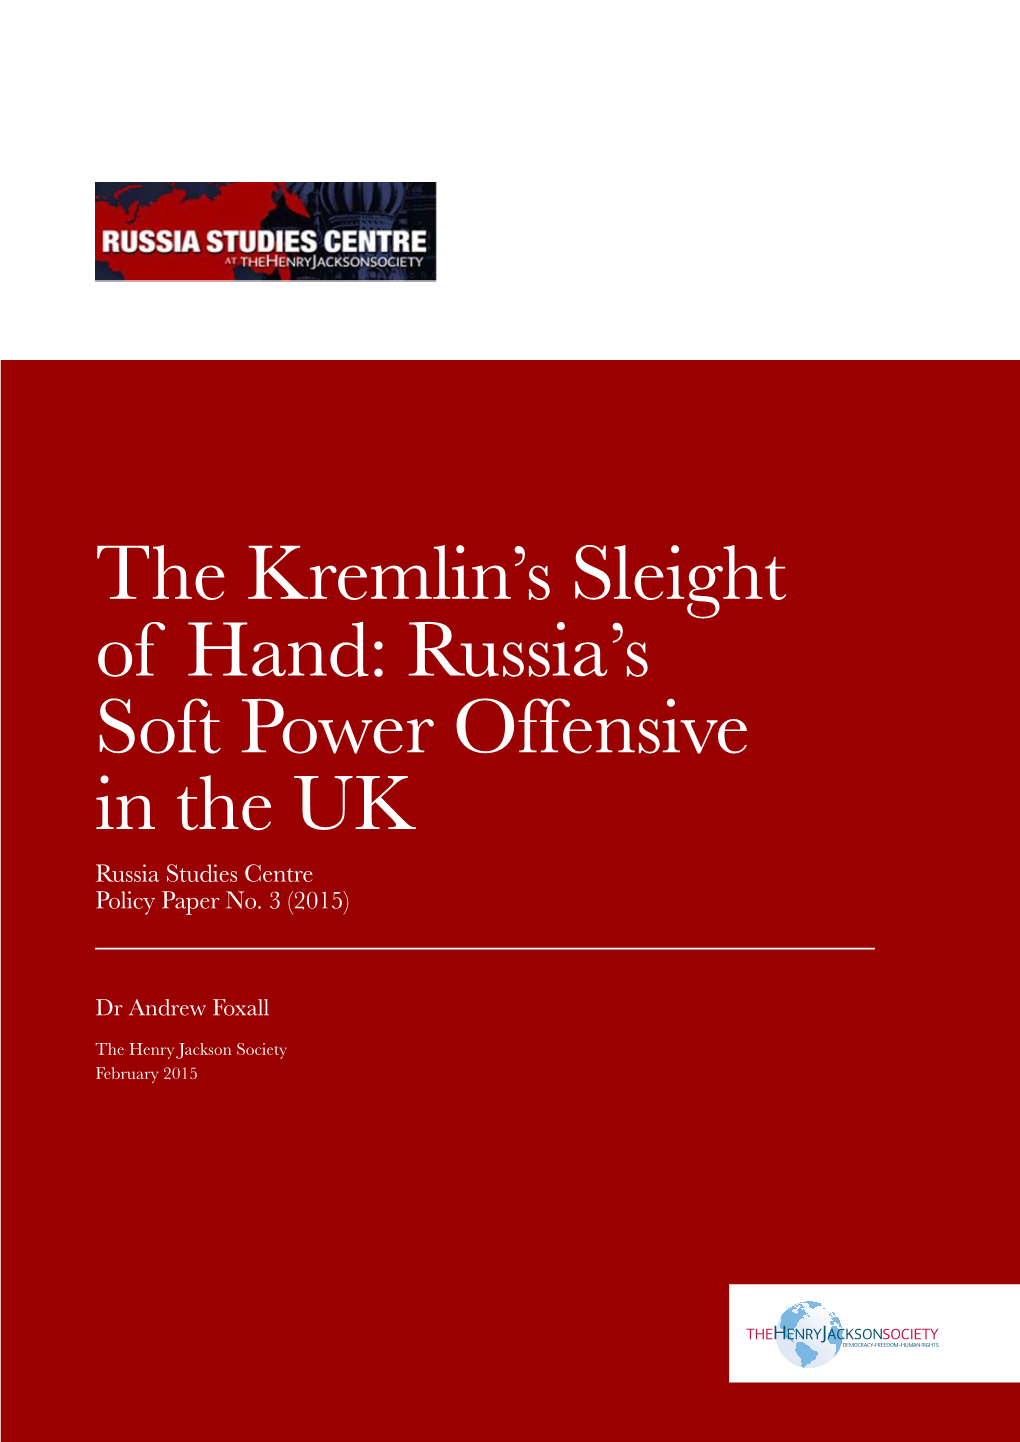 The Kremlin's Sleight of Hand: Russia's Soft Power Offensive in The